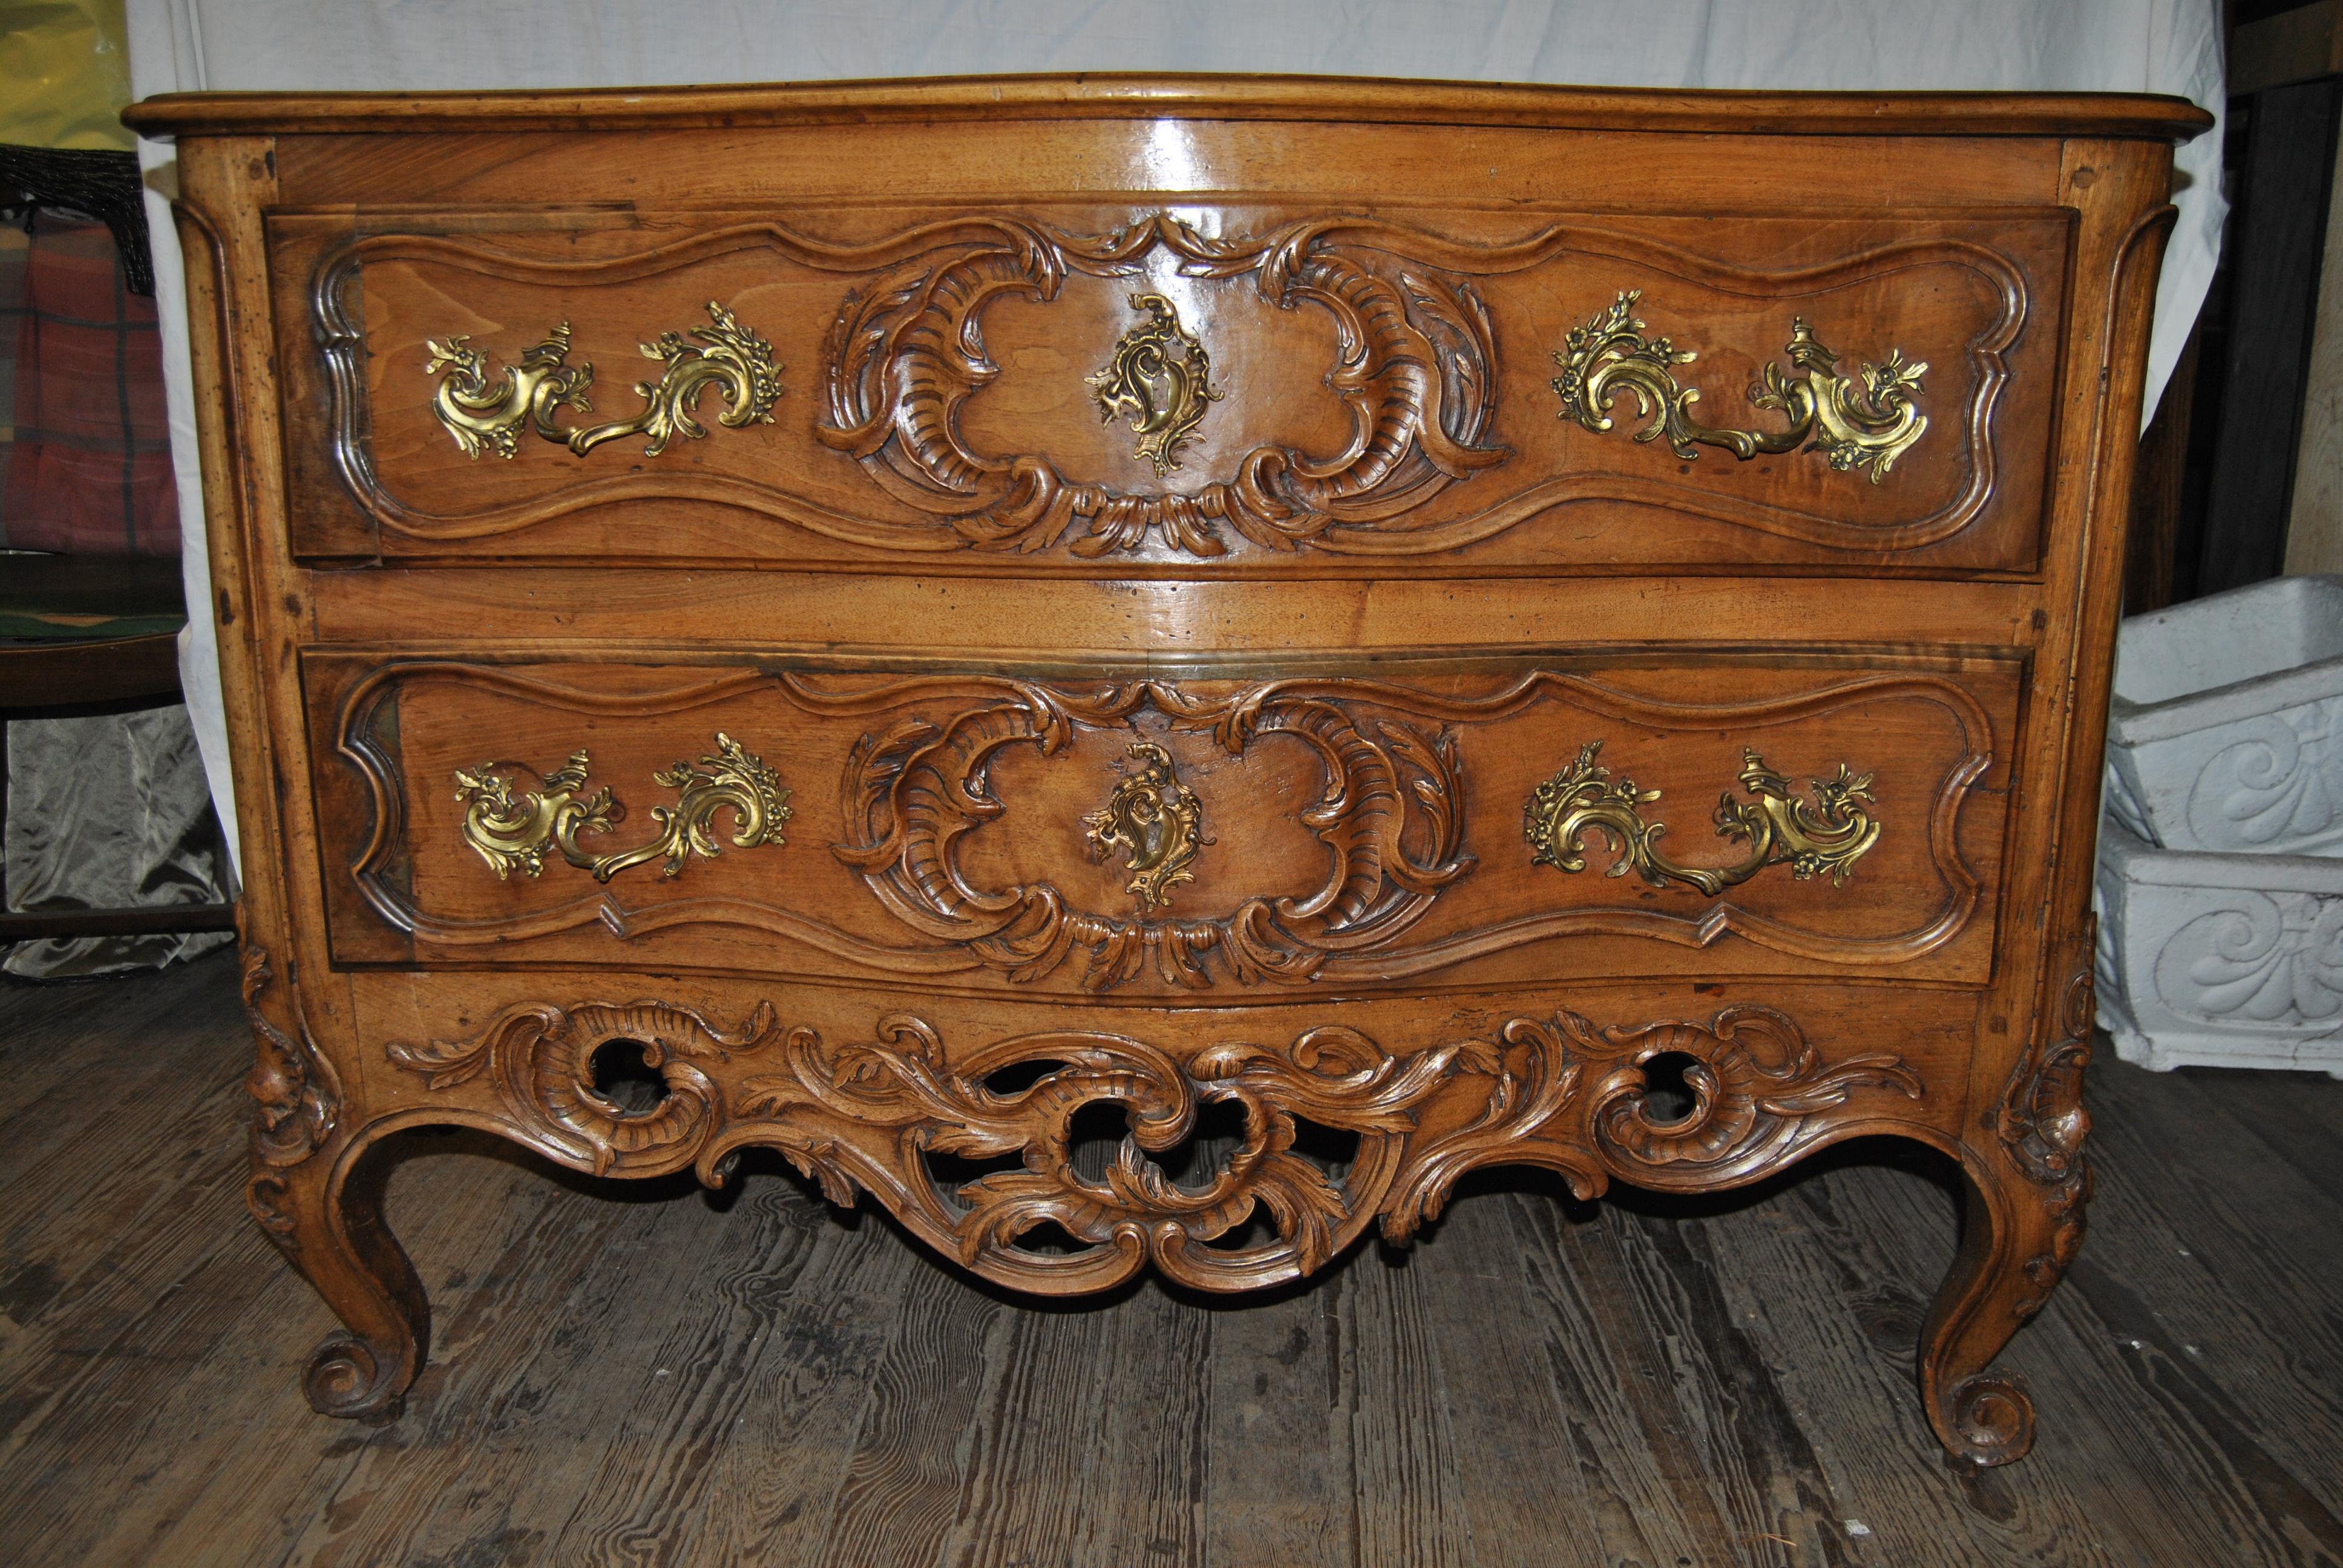 18th Century French Carved Walnut Chest of Drawers In Good Condition For Sale In Savannah, GA